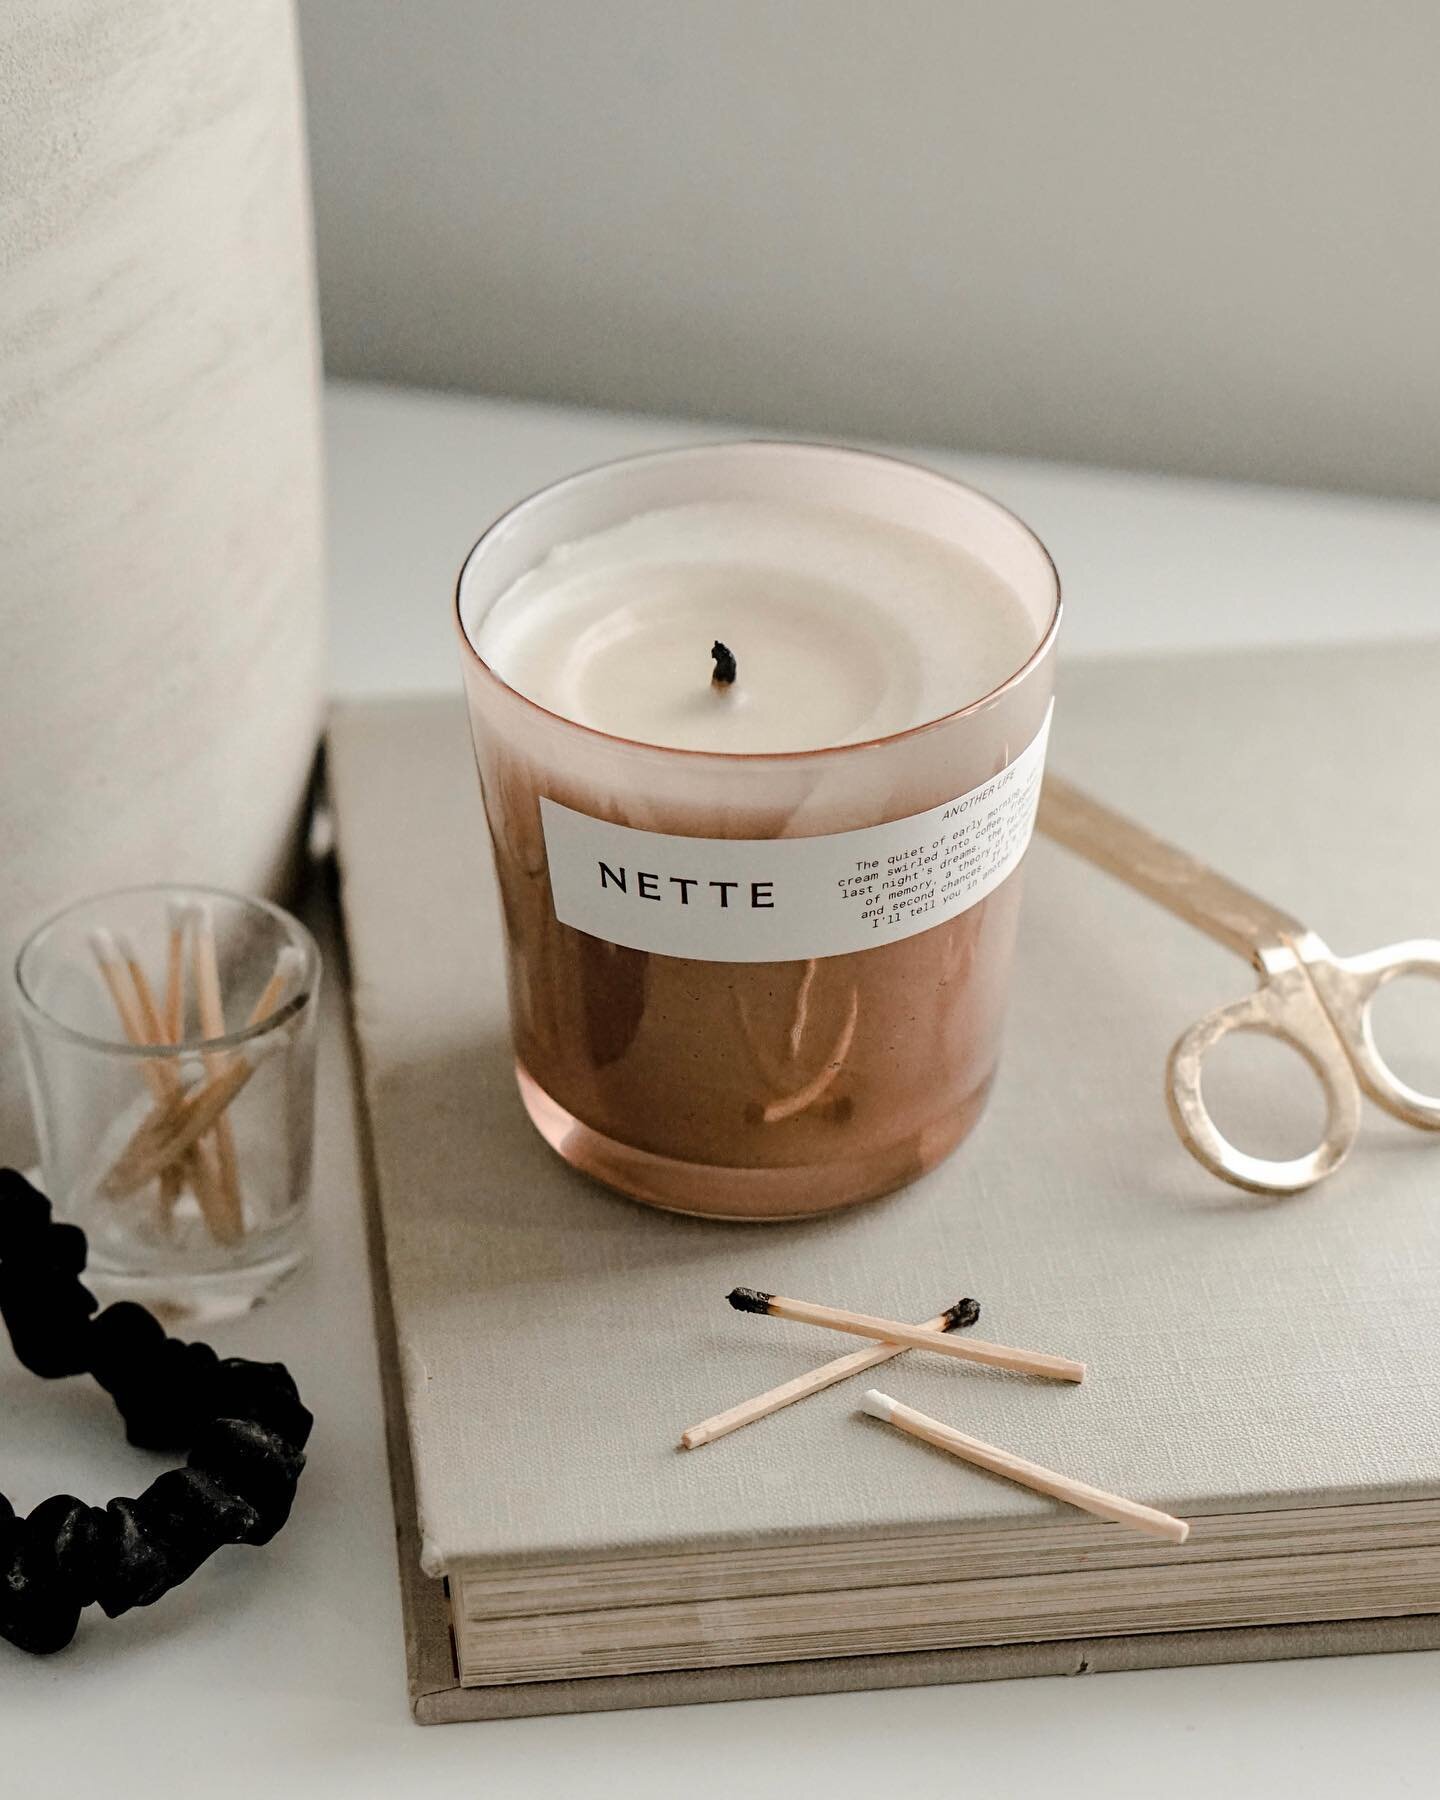 GIVEAWAY! mornings begin with Another Life by @nette.nyc. Candles are one of my favorite self-care practices that completely transform and calm my mood. Partnering with @nette.nyc for your chance to win your own candle! To enter, must be following me